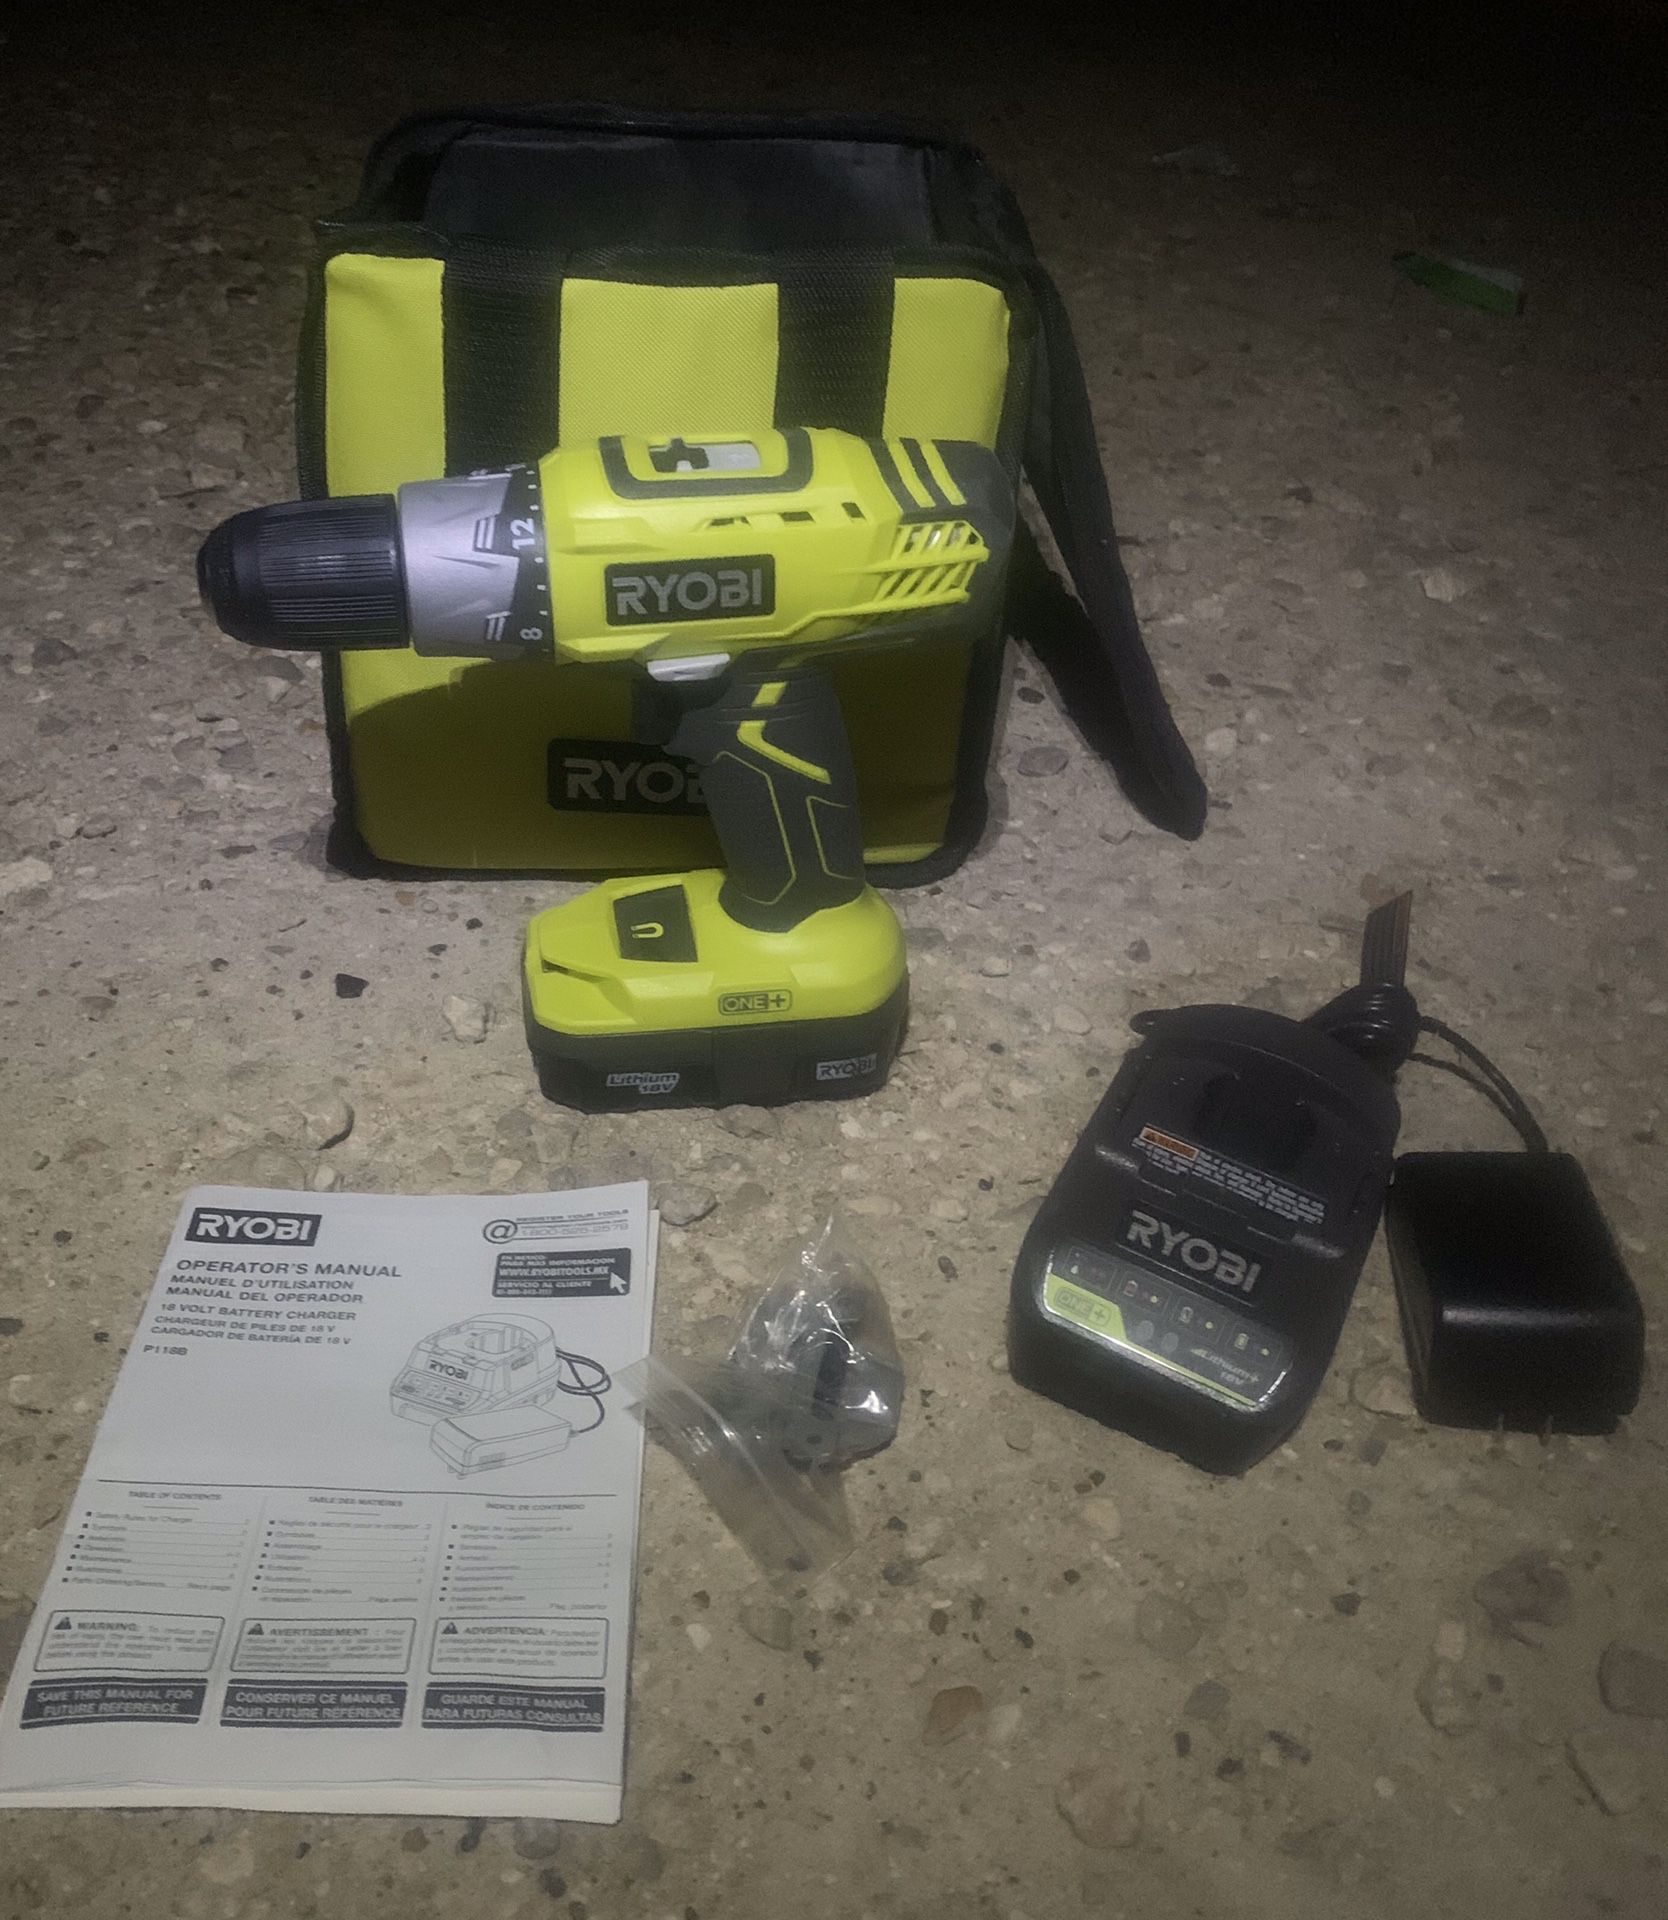 Ryobi ONE - 18 Volt Lithium-Ion + Cordless + Brushless Hammer Drill / Driver Kit. (Drill, battery, charger, and bag)